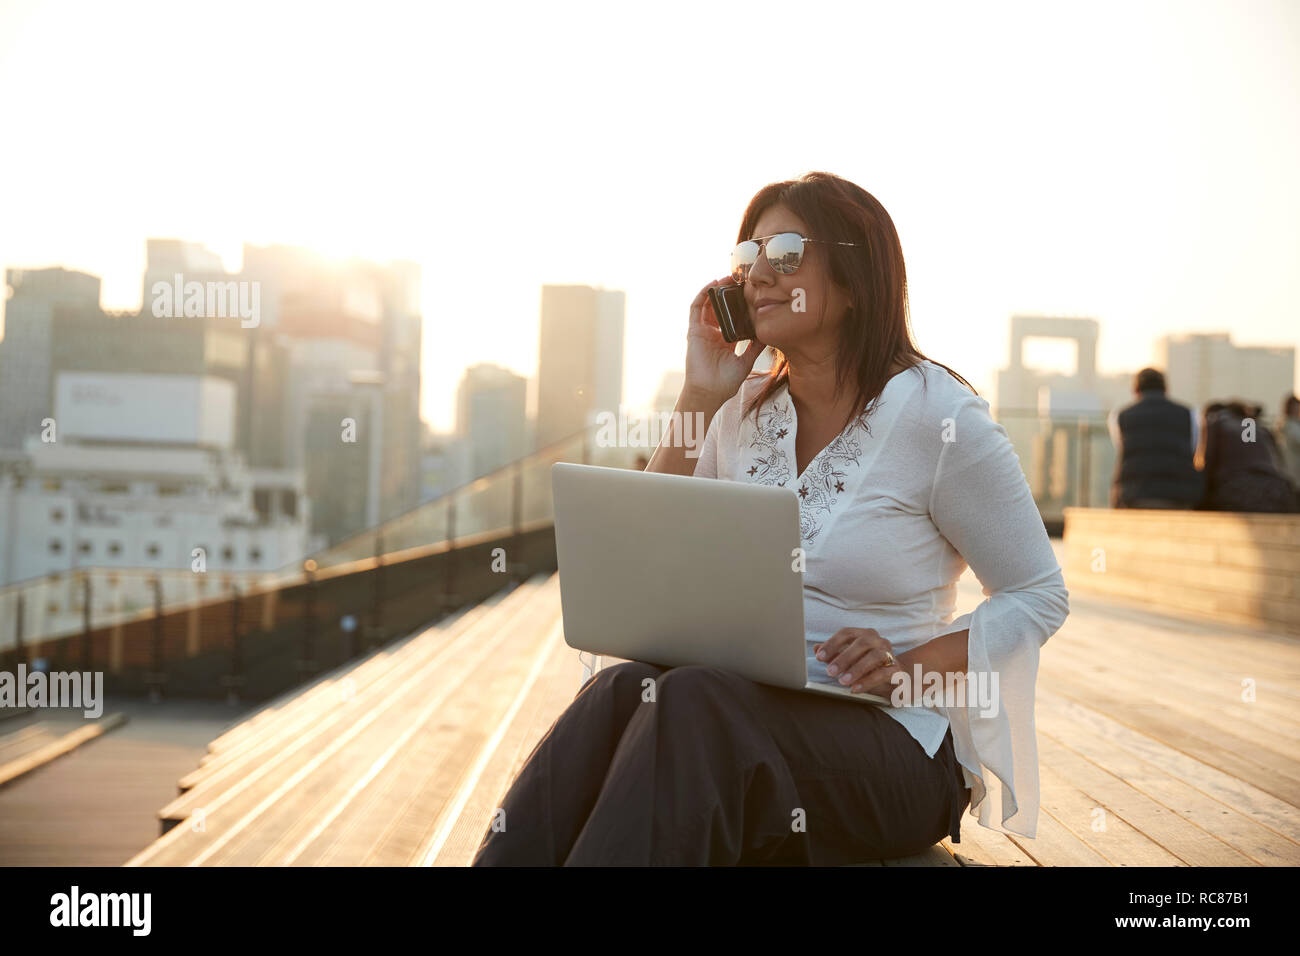 Businesswoman using laptop and smartphone on steps, Seoul, South Korea Stock Photo